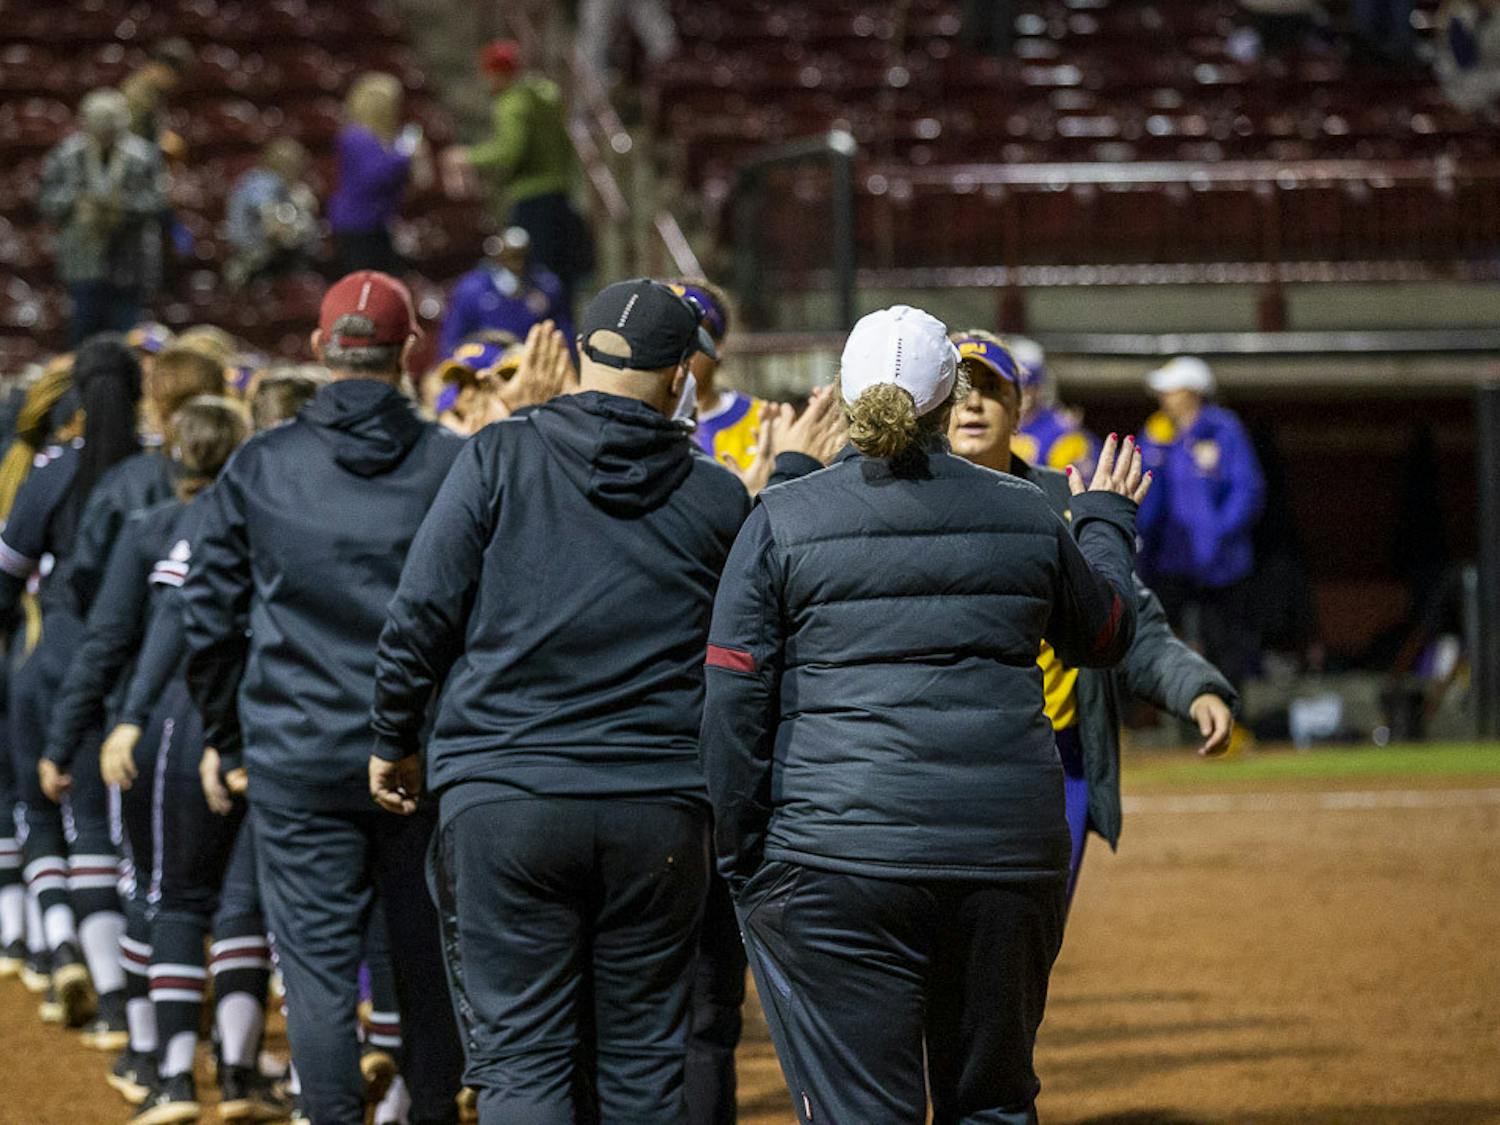 South Carolina and LSU players and coaching staff congratulate each other after their second matchup at Beckham Field on March 13, 2023. The Tigers defeated the Gamecocks 5-1 in the final game, clinching the series win.